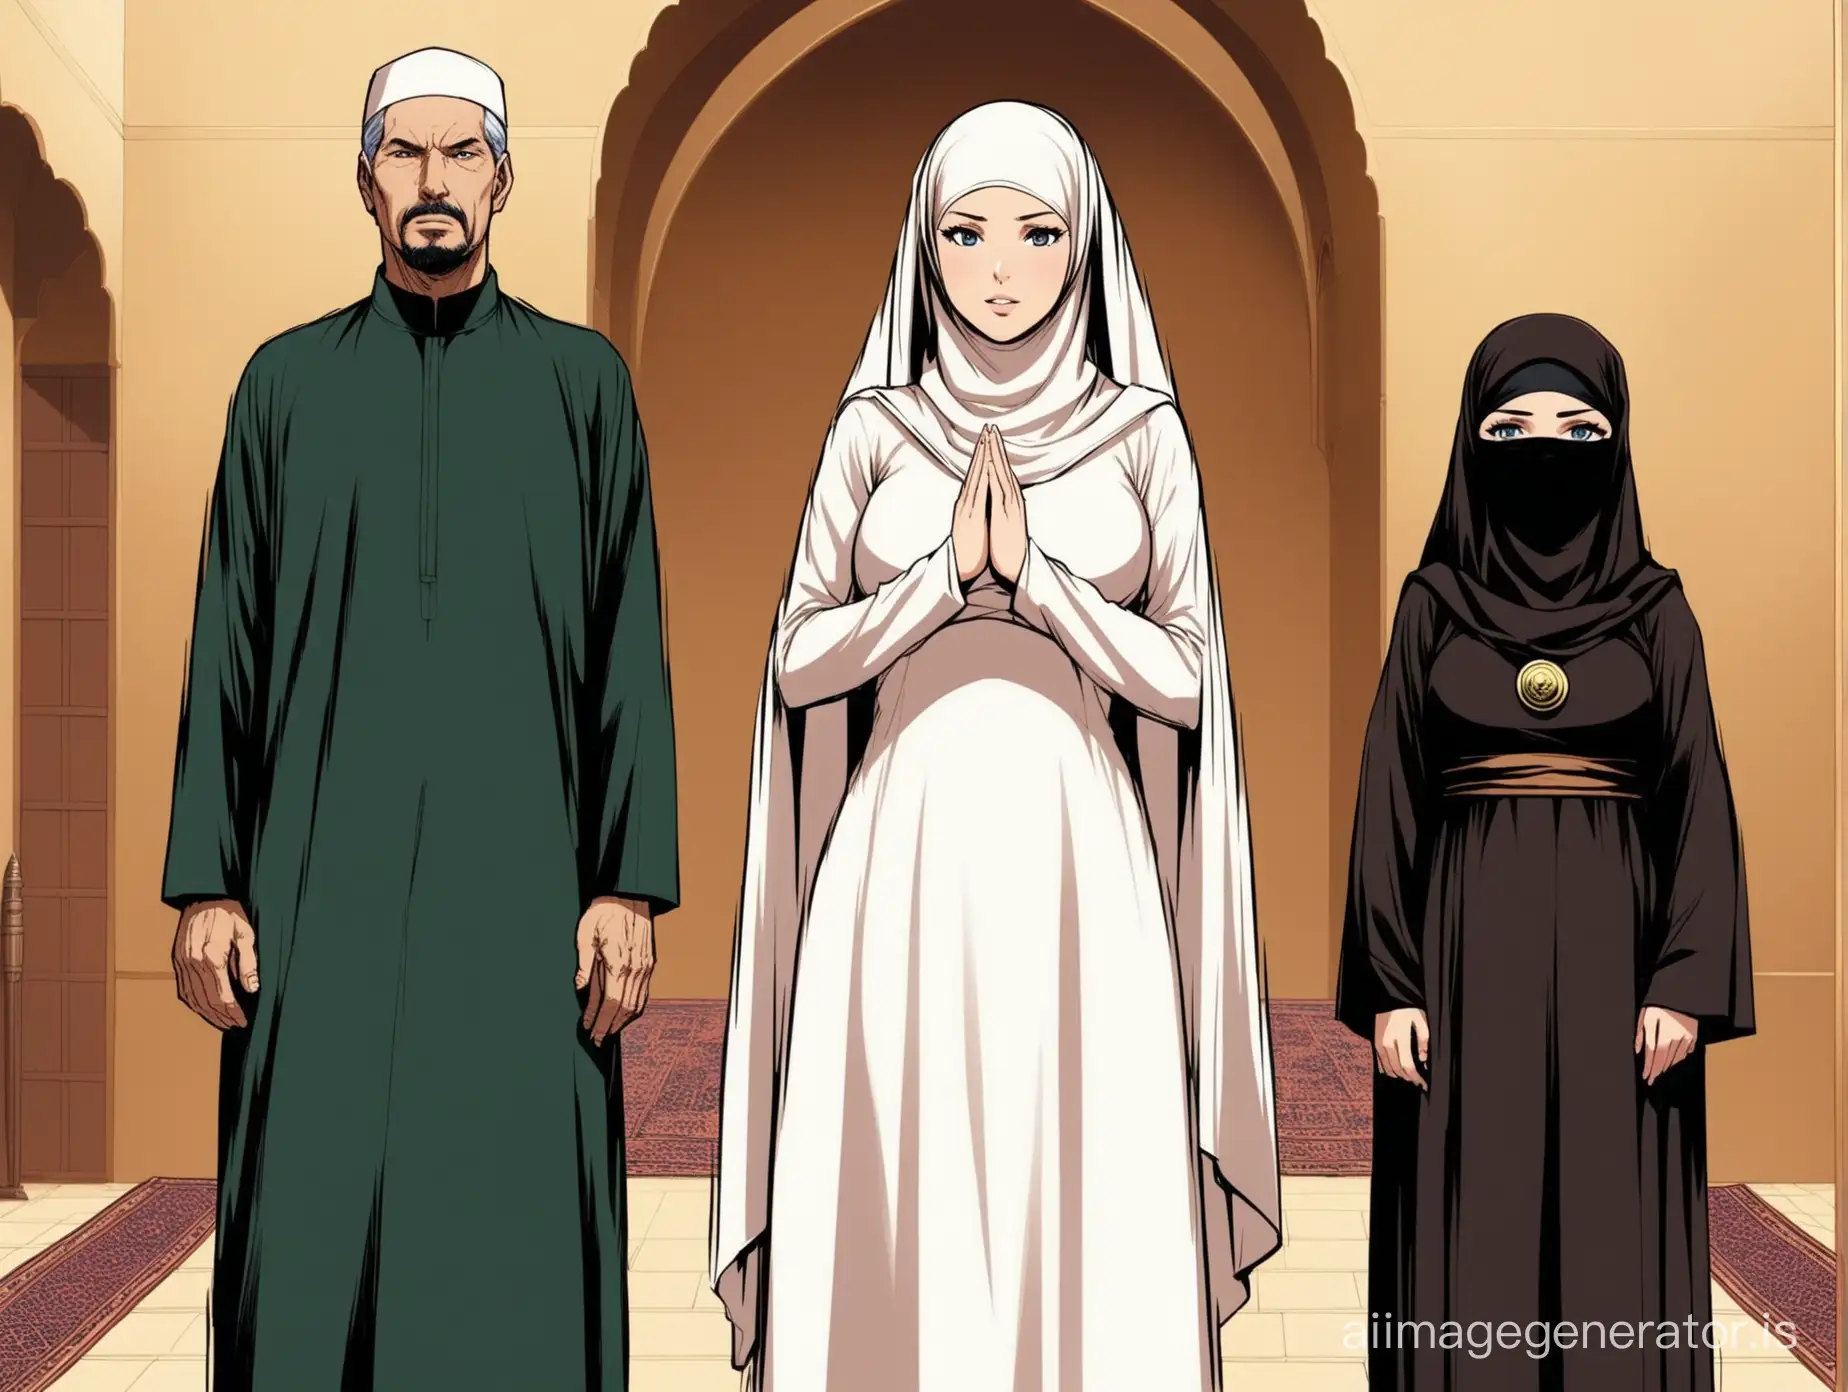 Susans Storm from the fantastic four , taken away by an old Muslim religious fanatic man , who decides to hypnotize Susan to turn her into Jamilah his loyal faithful Muslim wife . She is dressed into a floor-length flowing jilbab with hijab and niqab , standing demurely beside her new husband and master